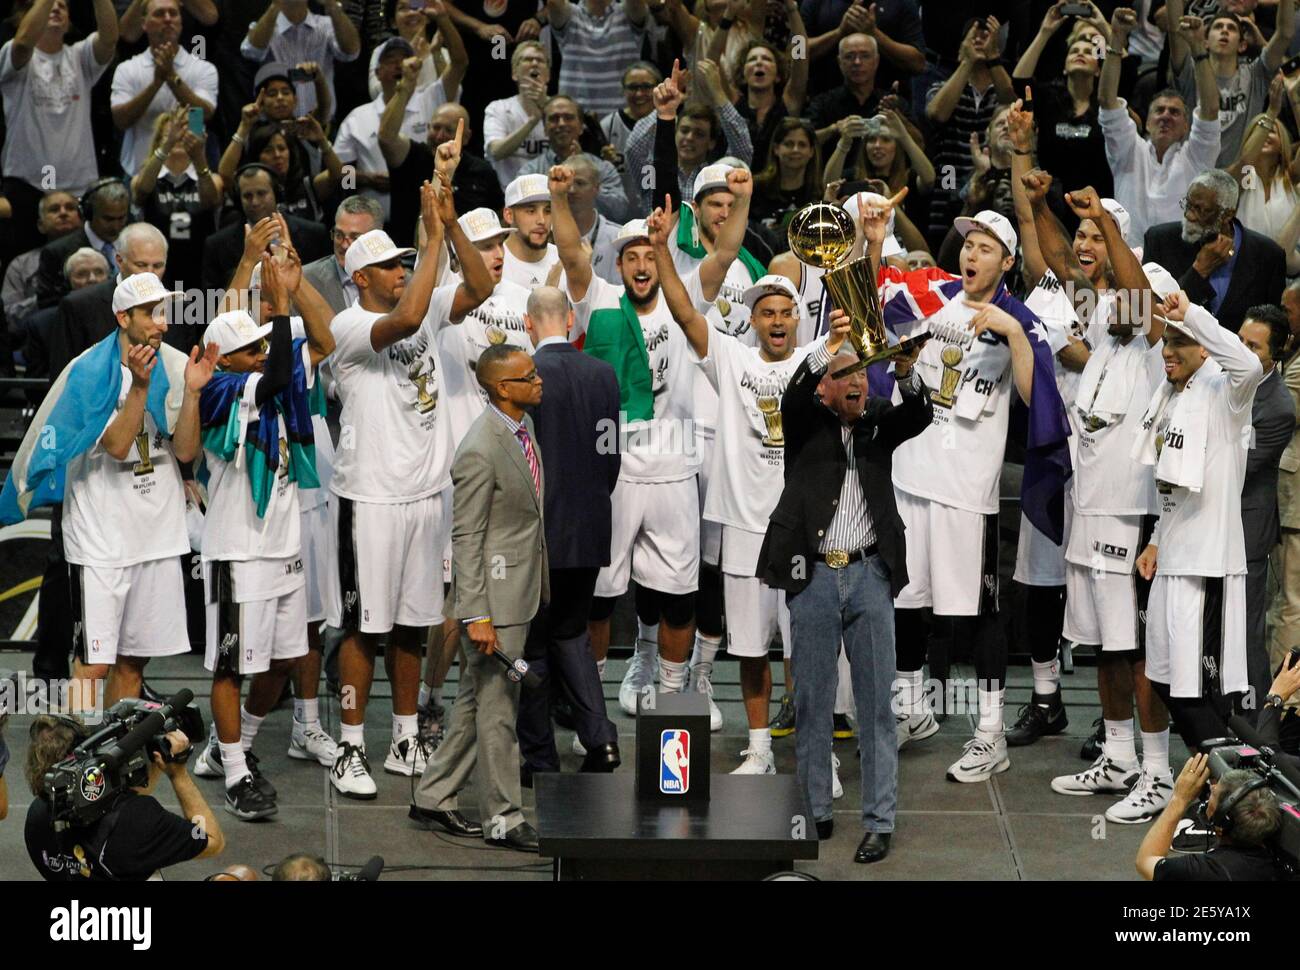 san-antonio-spurs-owner-peter-holt-5th-r-hoists-the-larry-obrien-trophy-in-front-of-the-team-after-they-defeated-the-miami-heat-in-game-5-of-their-nba-finals-basketball-series-in-san-antonio-texas-june-15-2014-reutersmike-stone-united-states-tags-sports-basketball-tpx-images-of-the-day-2E5YA1X.jpg